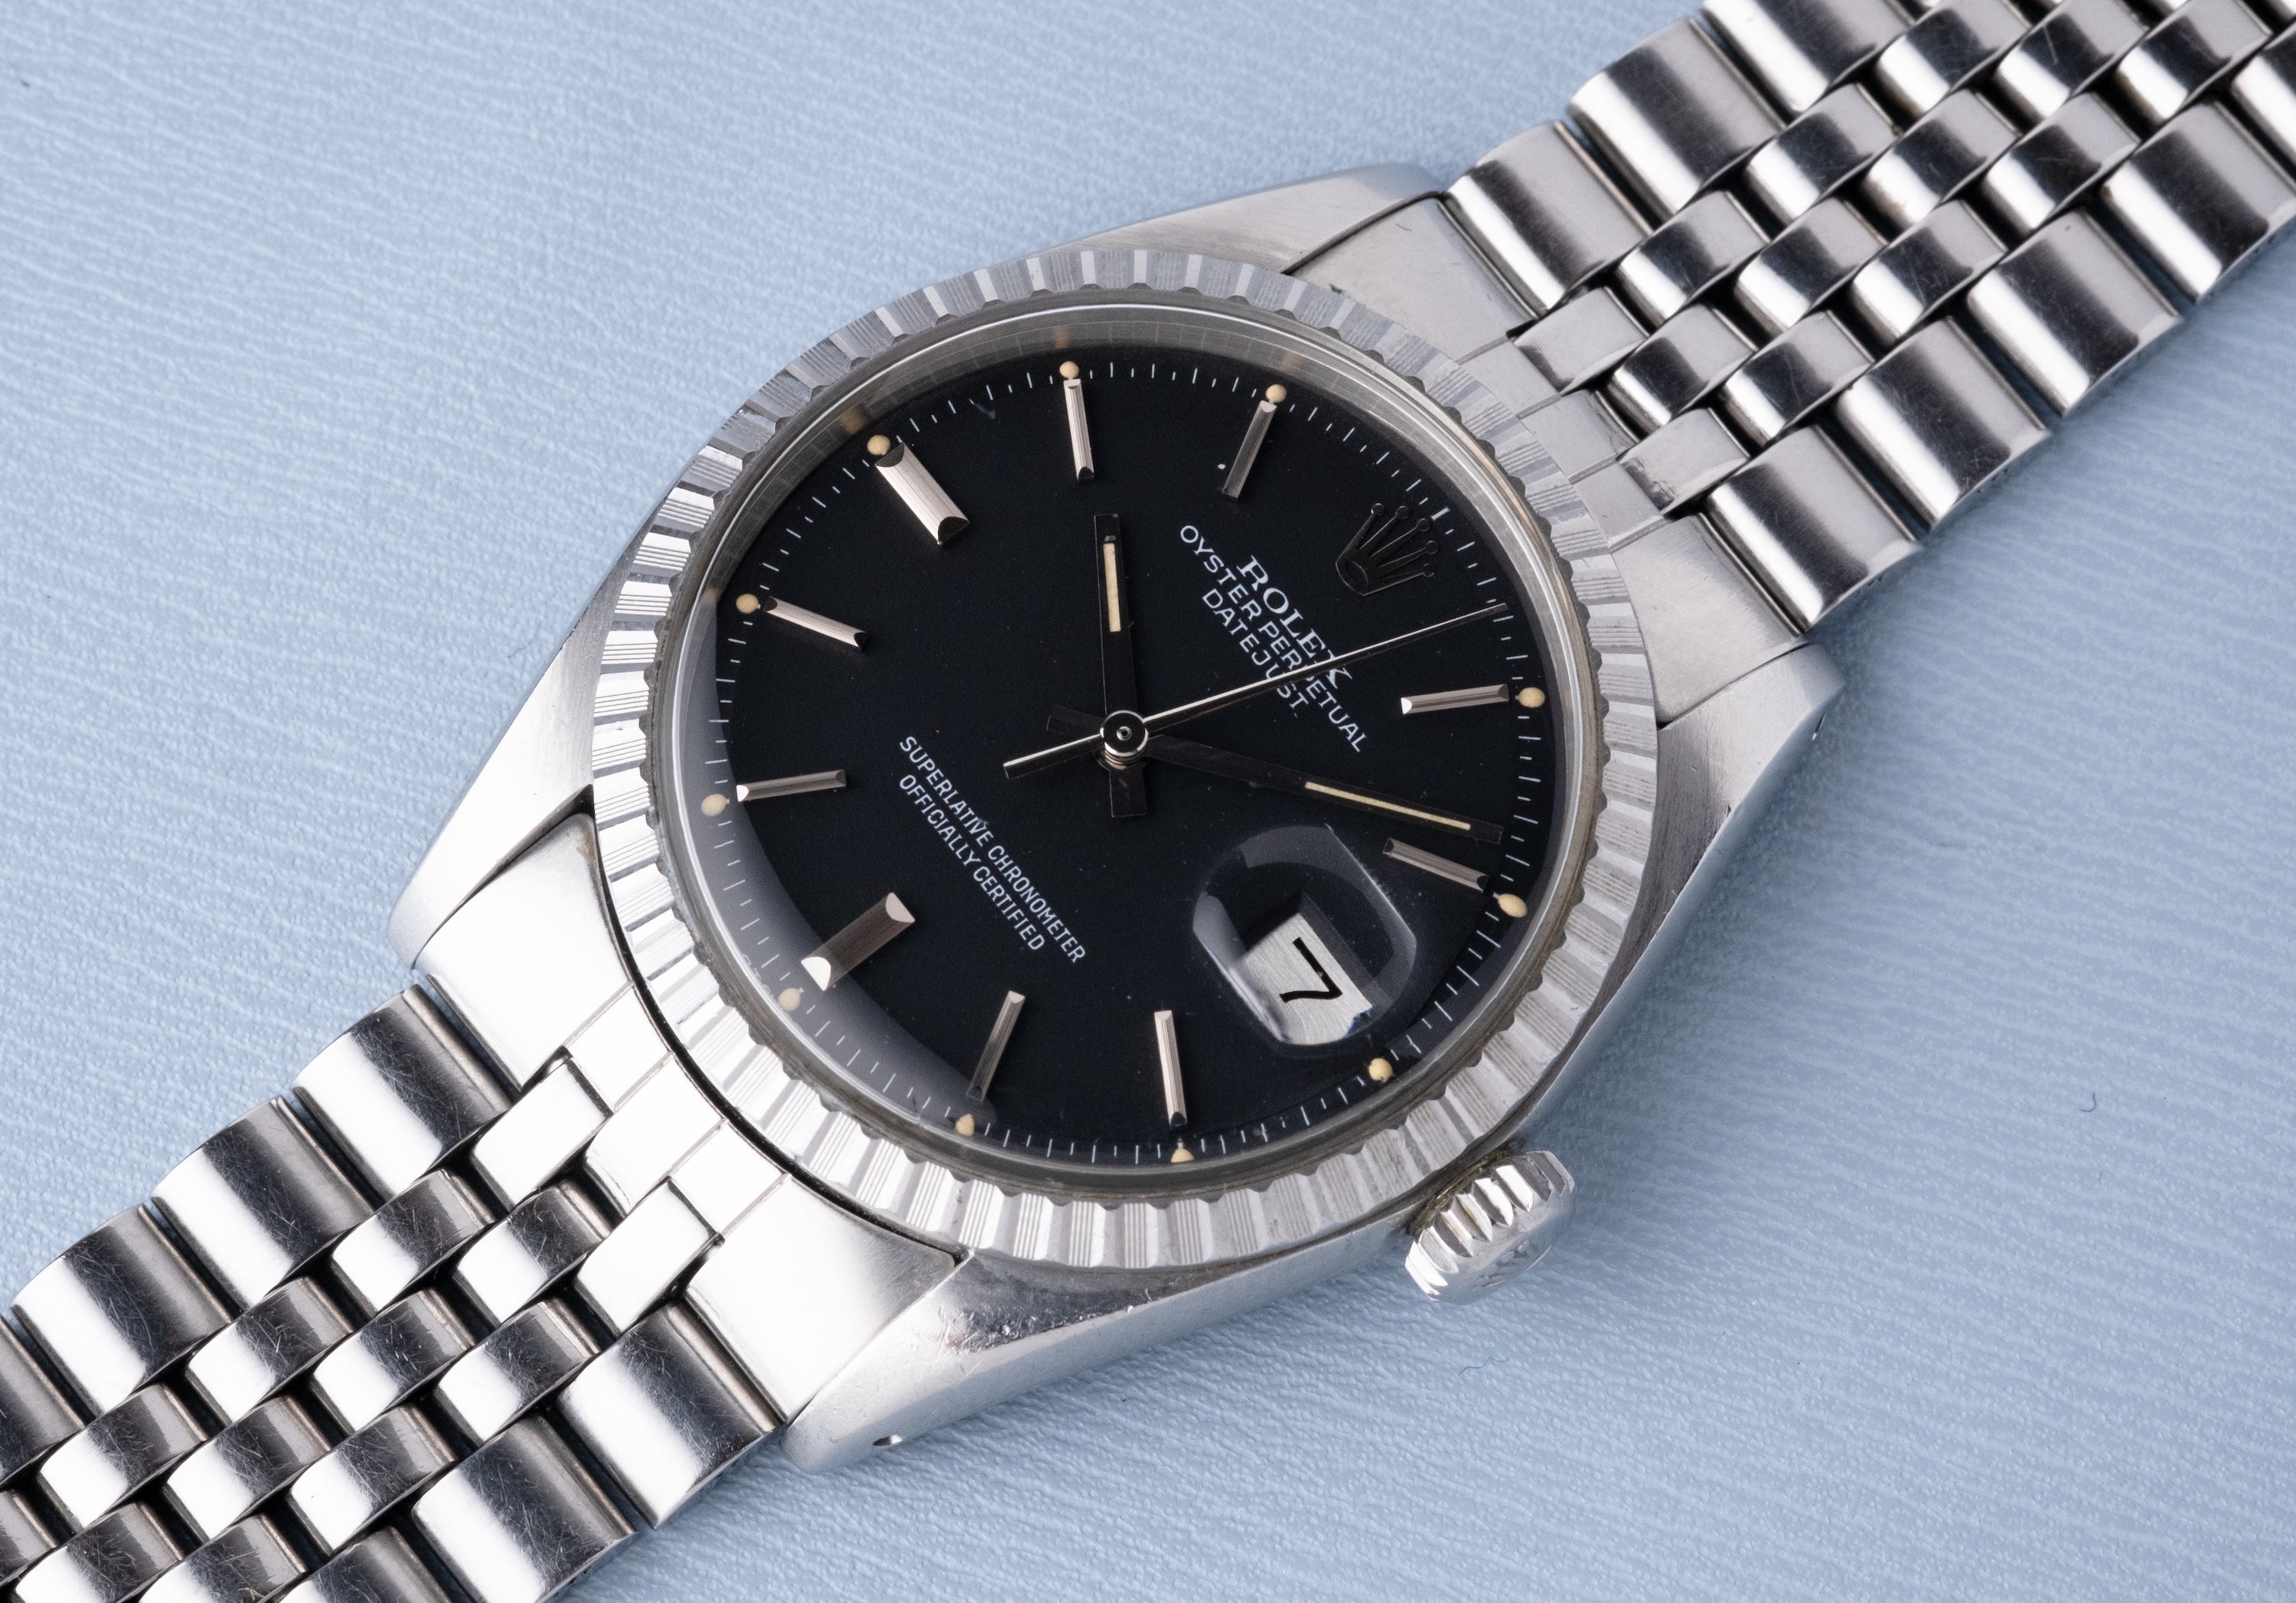 ROLEX Oyster Perpetual Datejust Ref. 1603 Black Sigma Dial (1975)